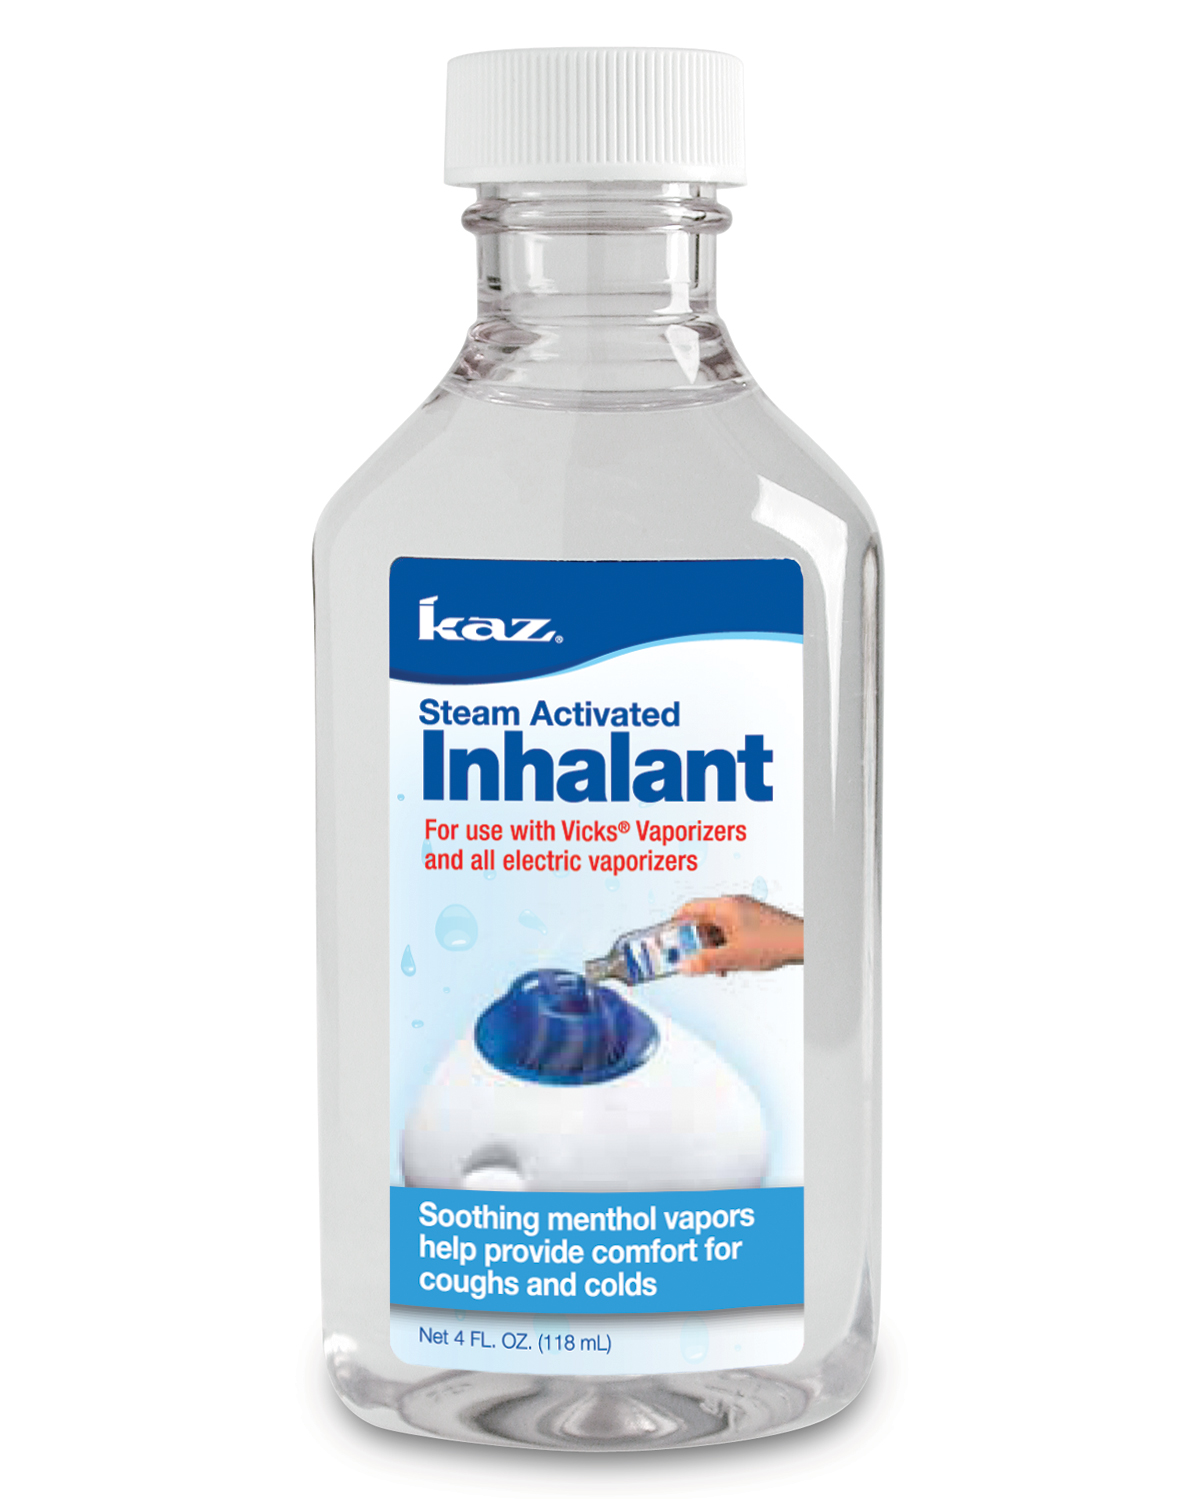 Kaz Inhalant for Humidifiers - image 1 of 2